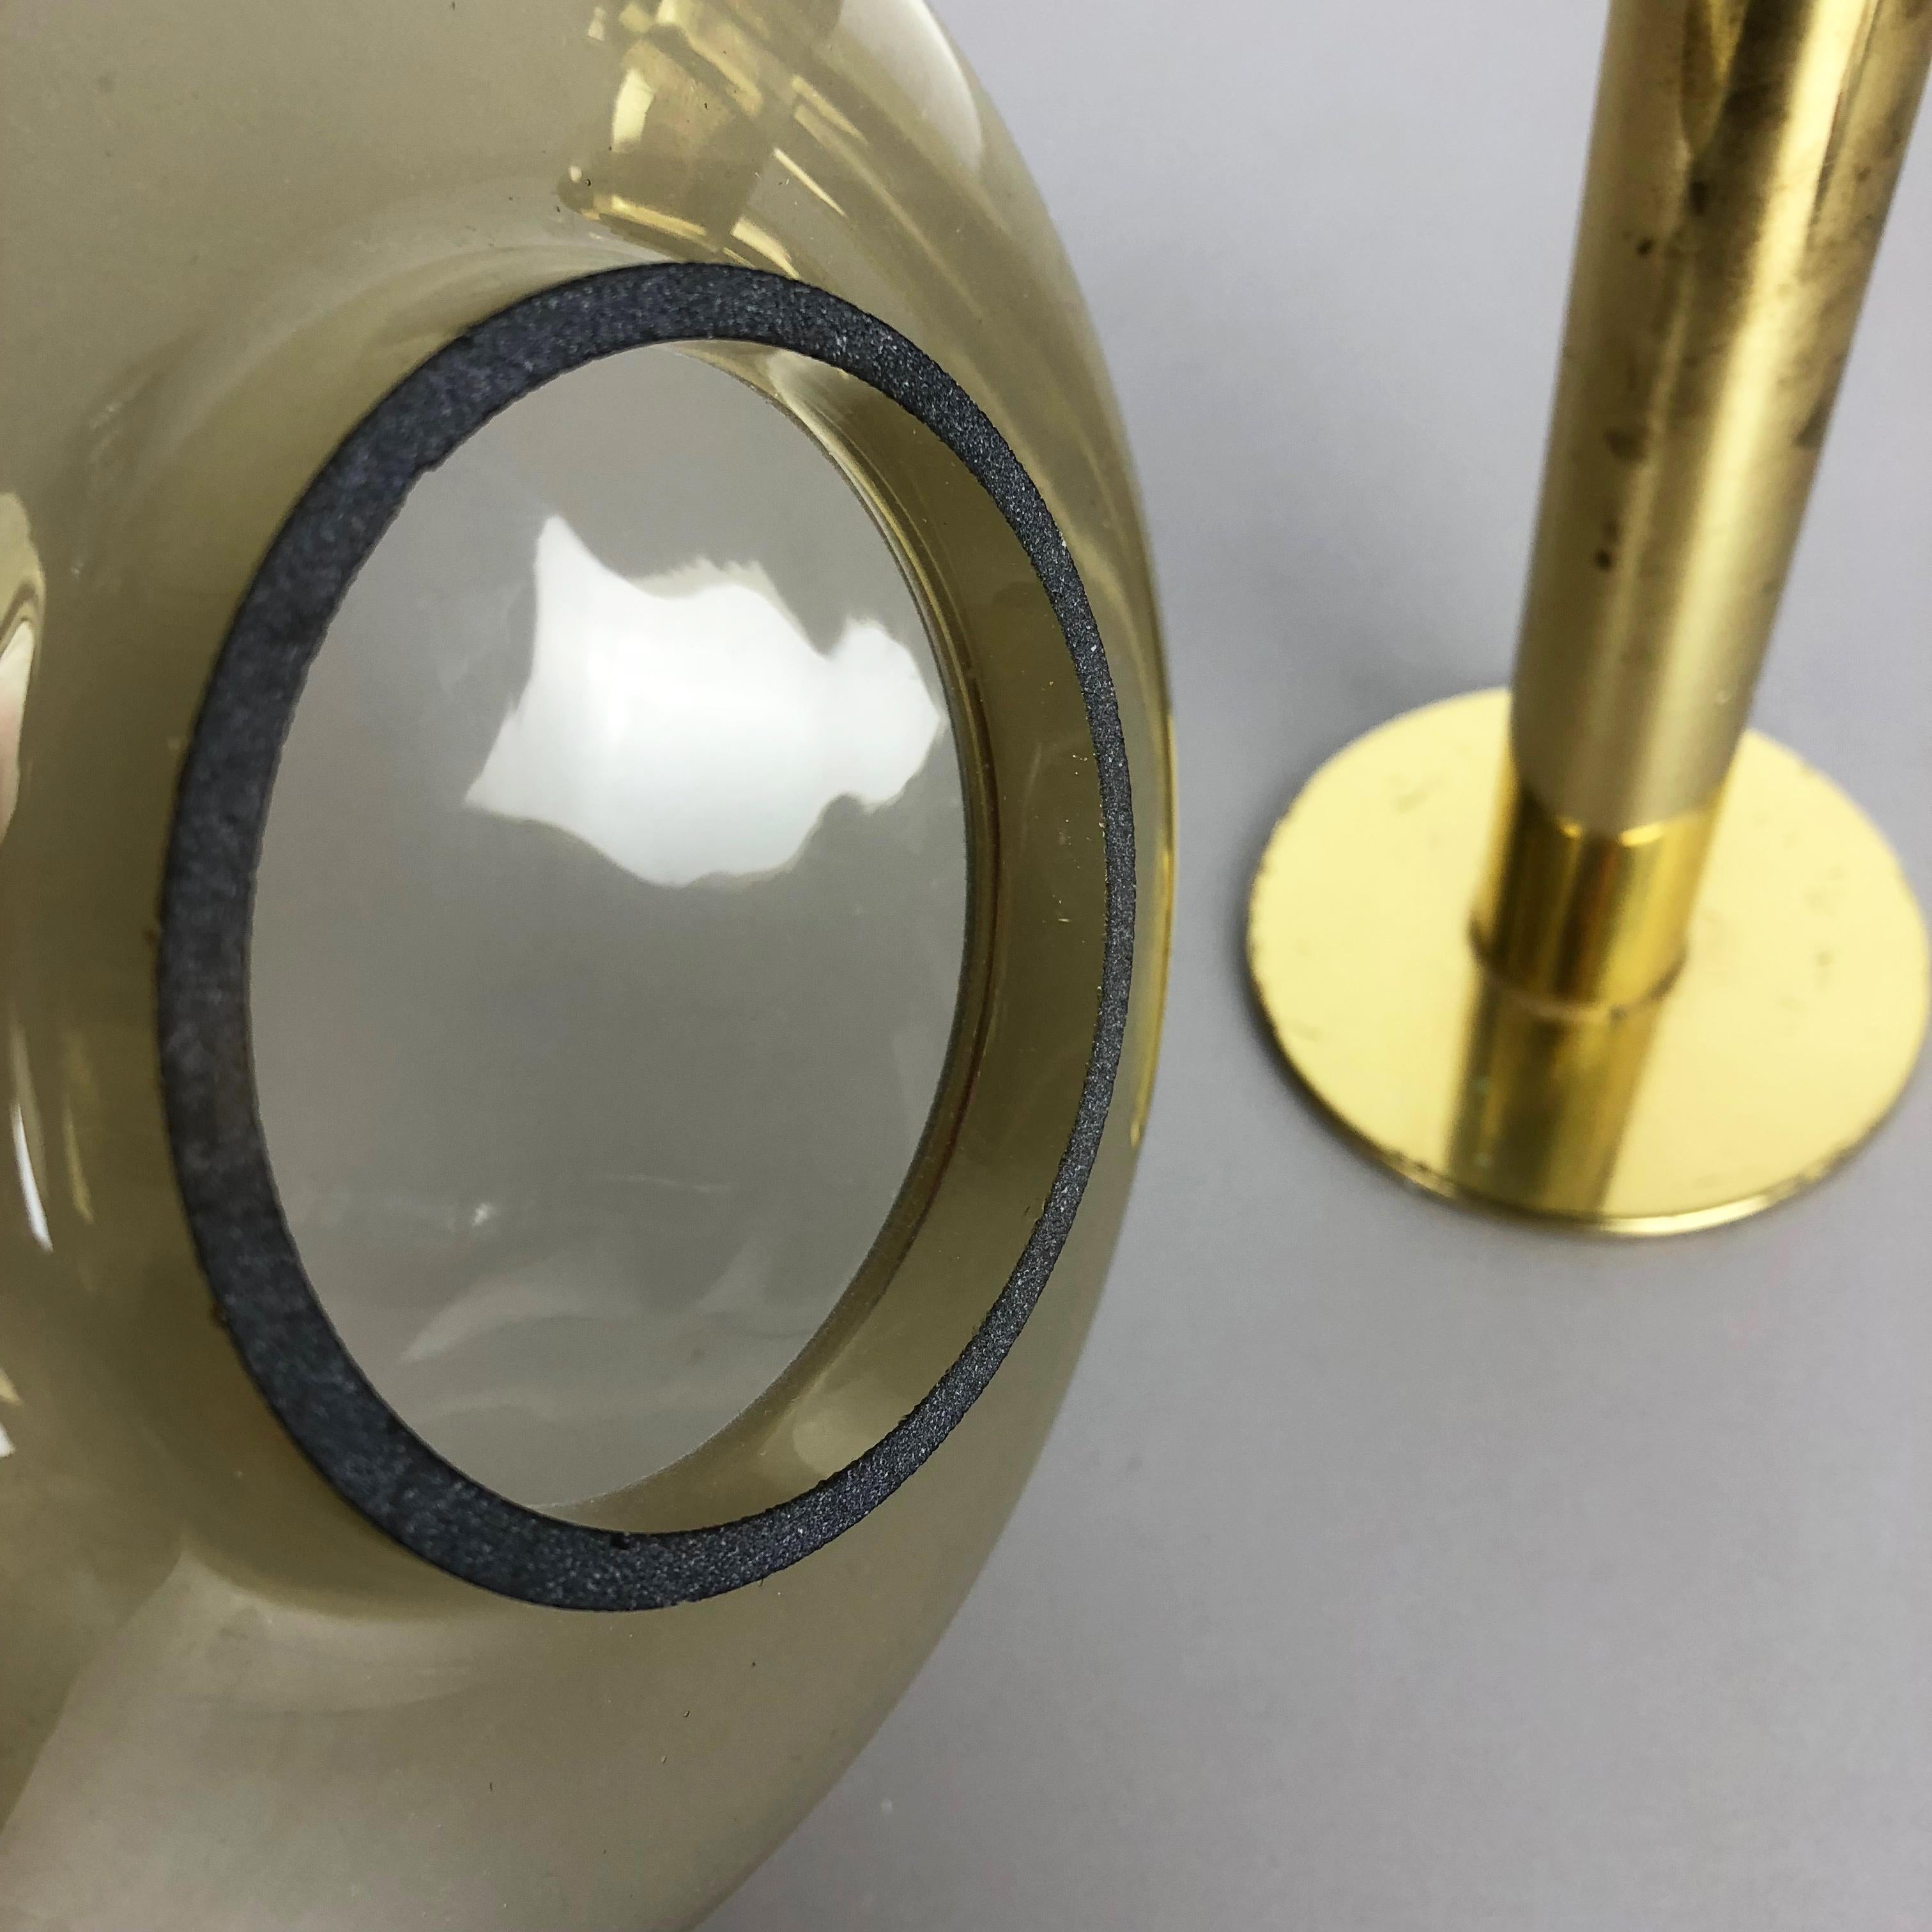 1960s Brass and Glass 